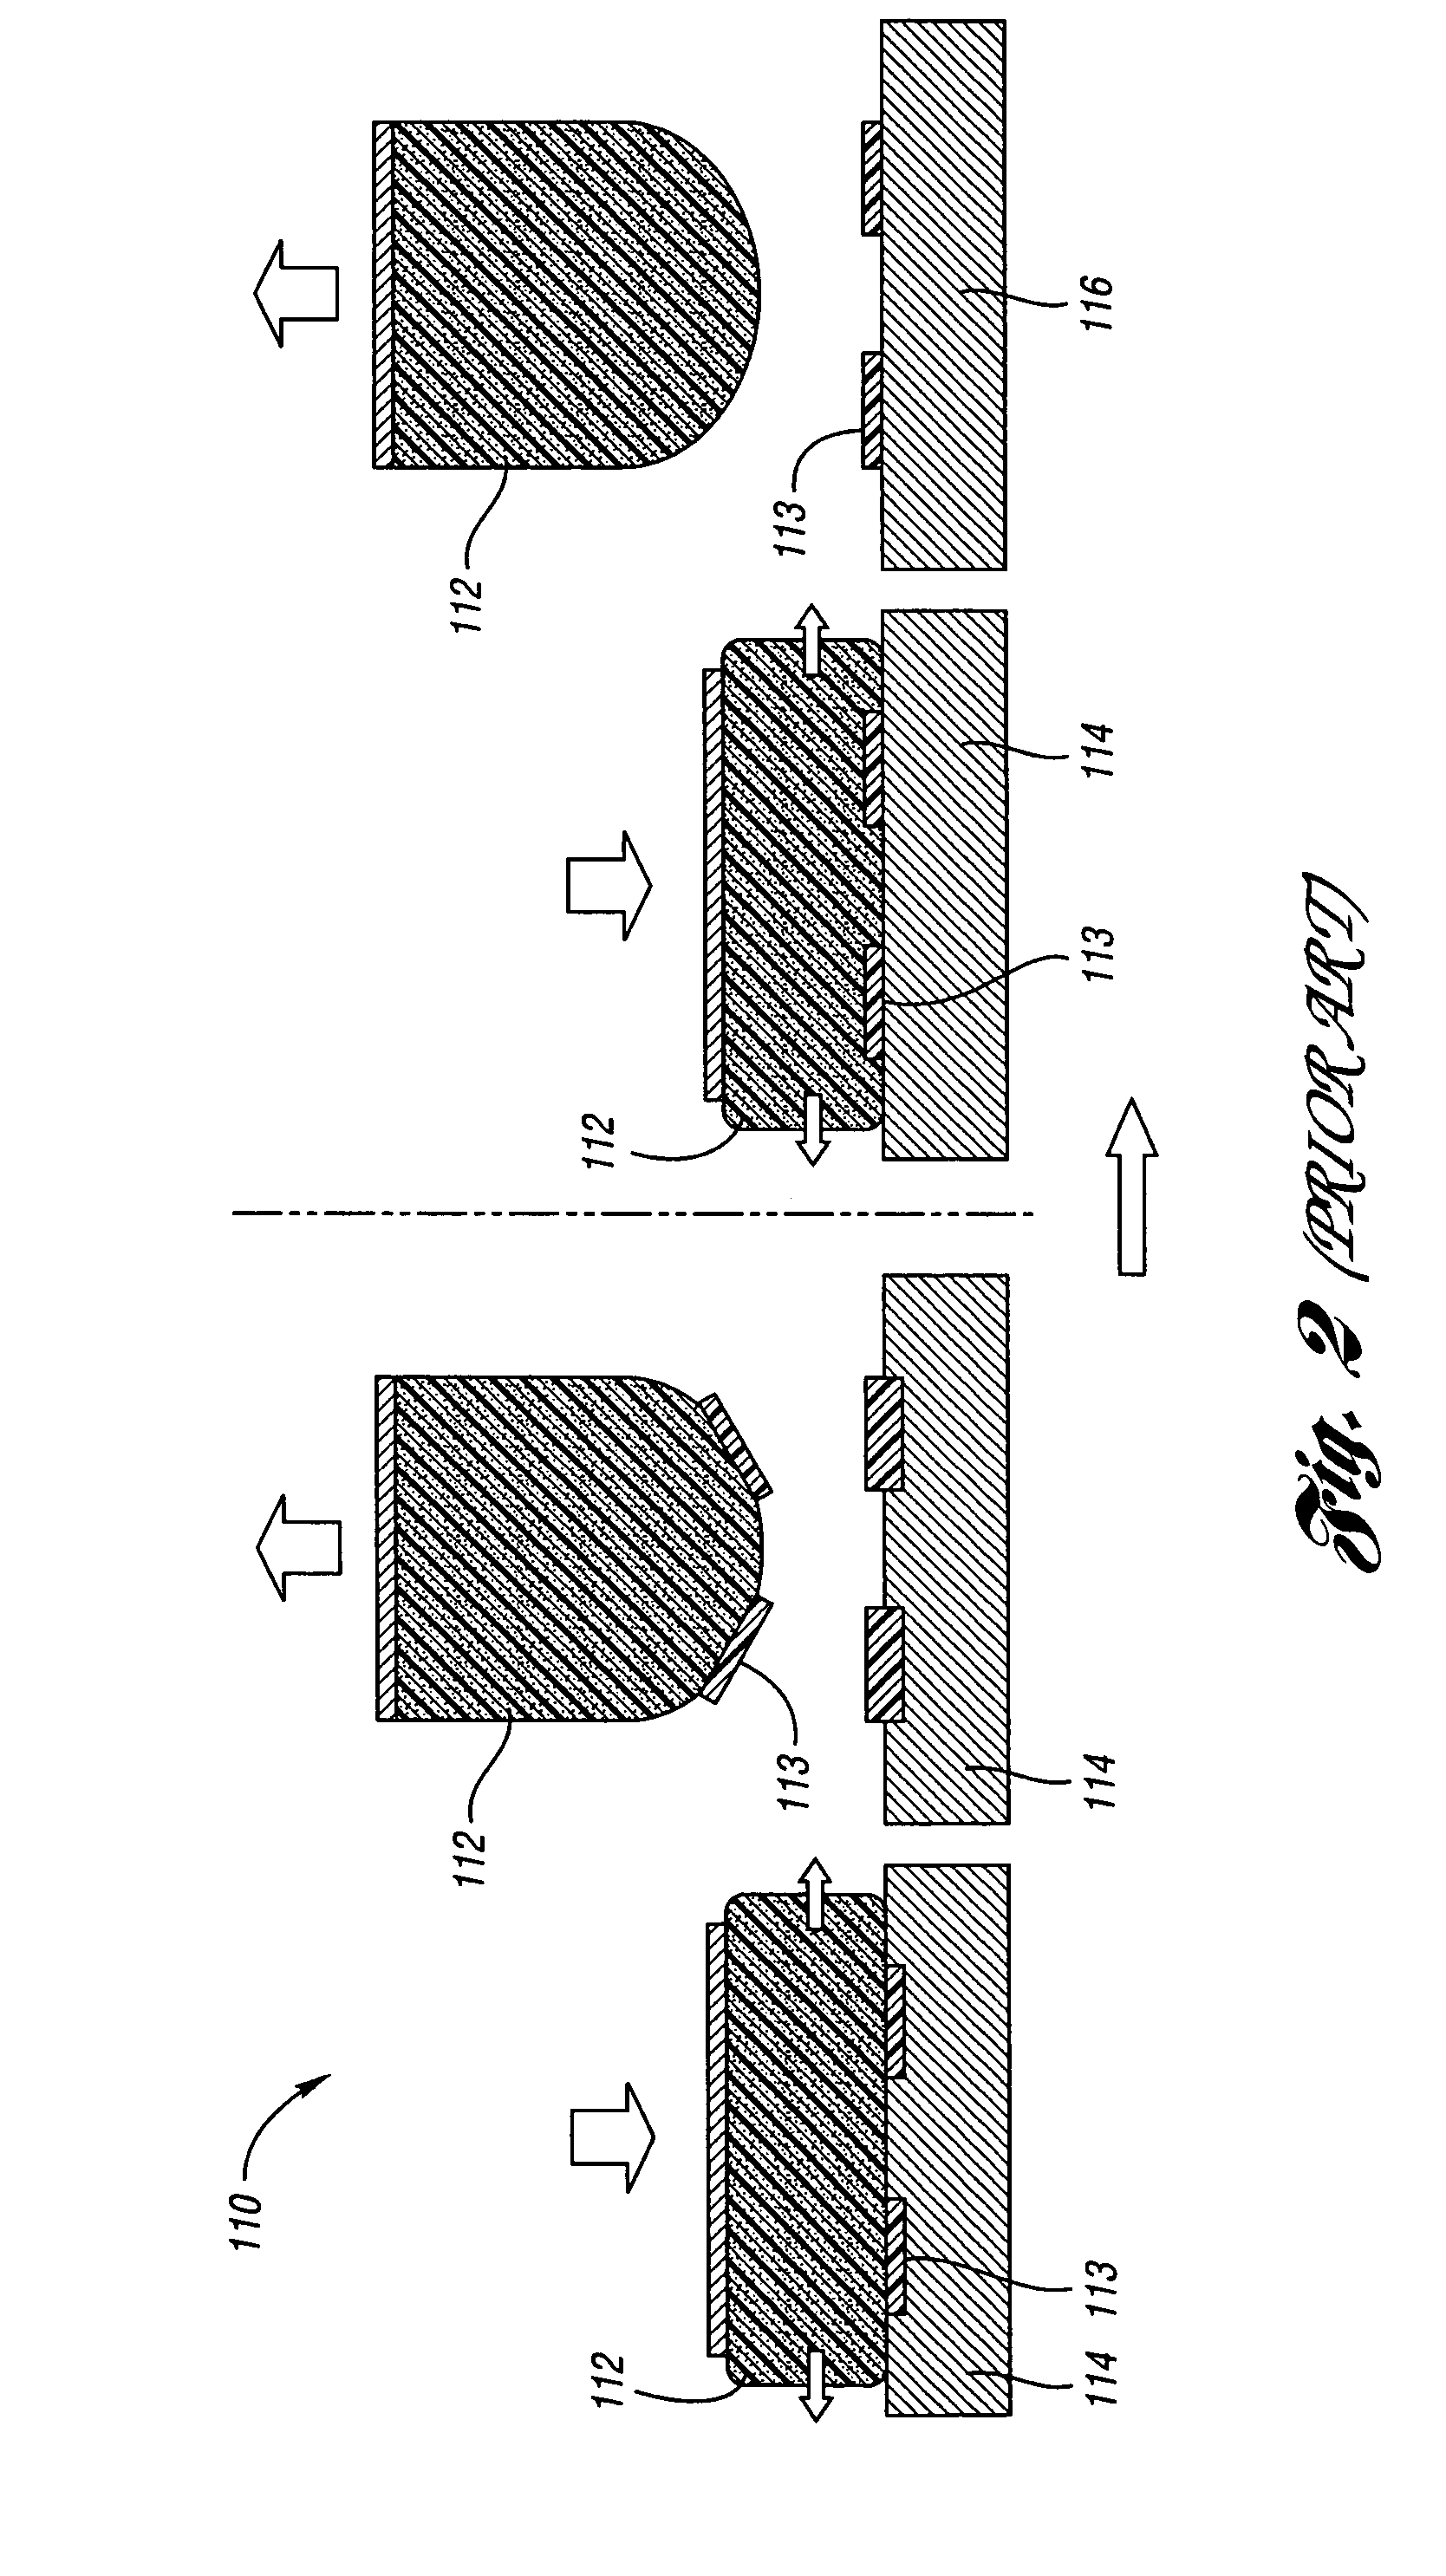 Inks for use in membrane image transfer printing process